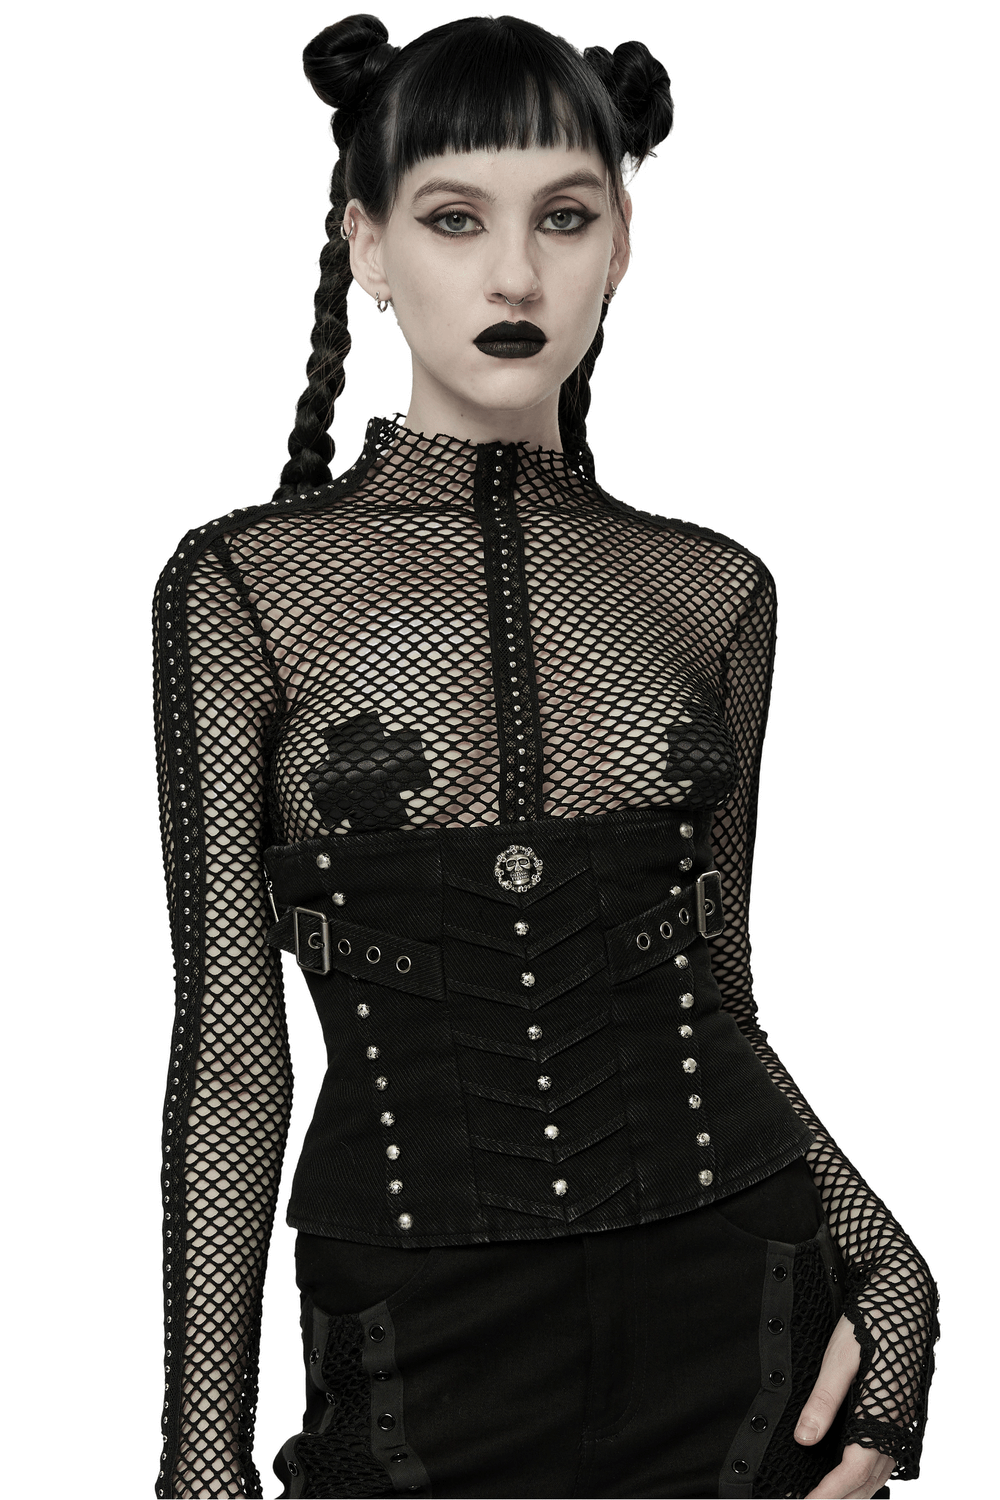 Edgy Twill Fabric Corset with Metal Skull Rivets